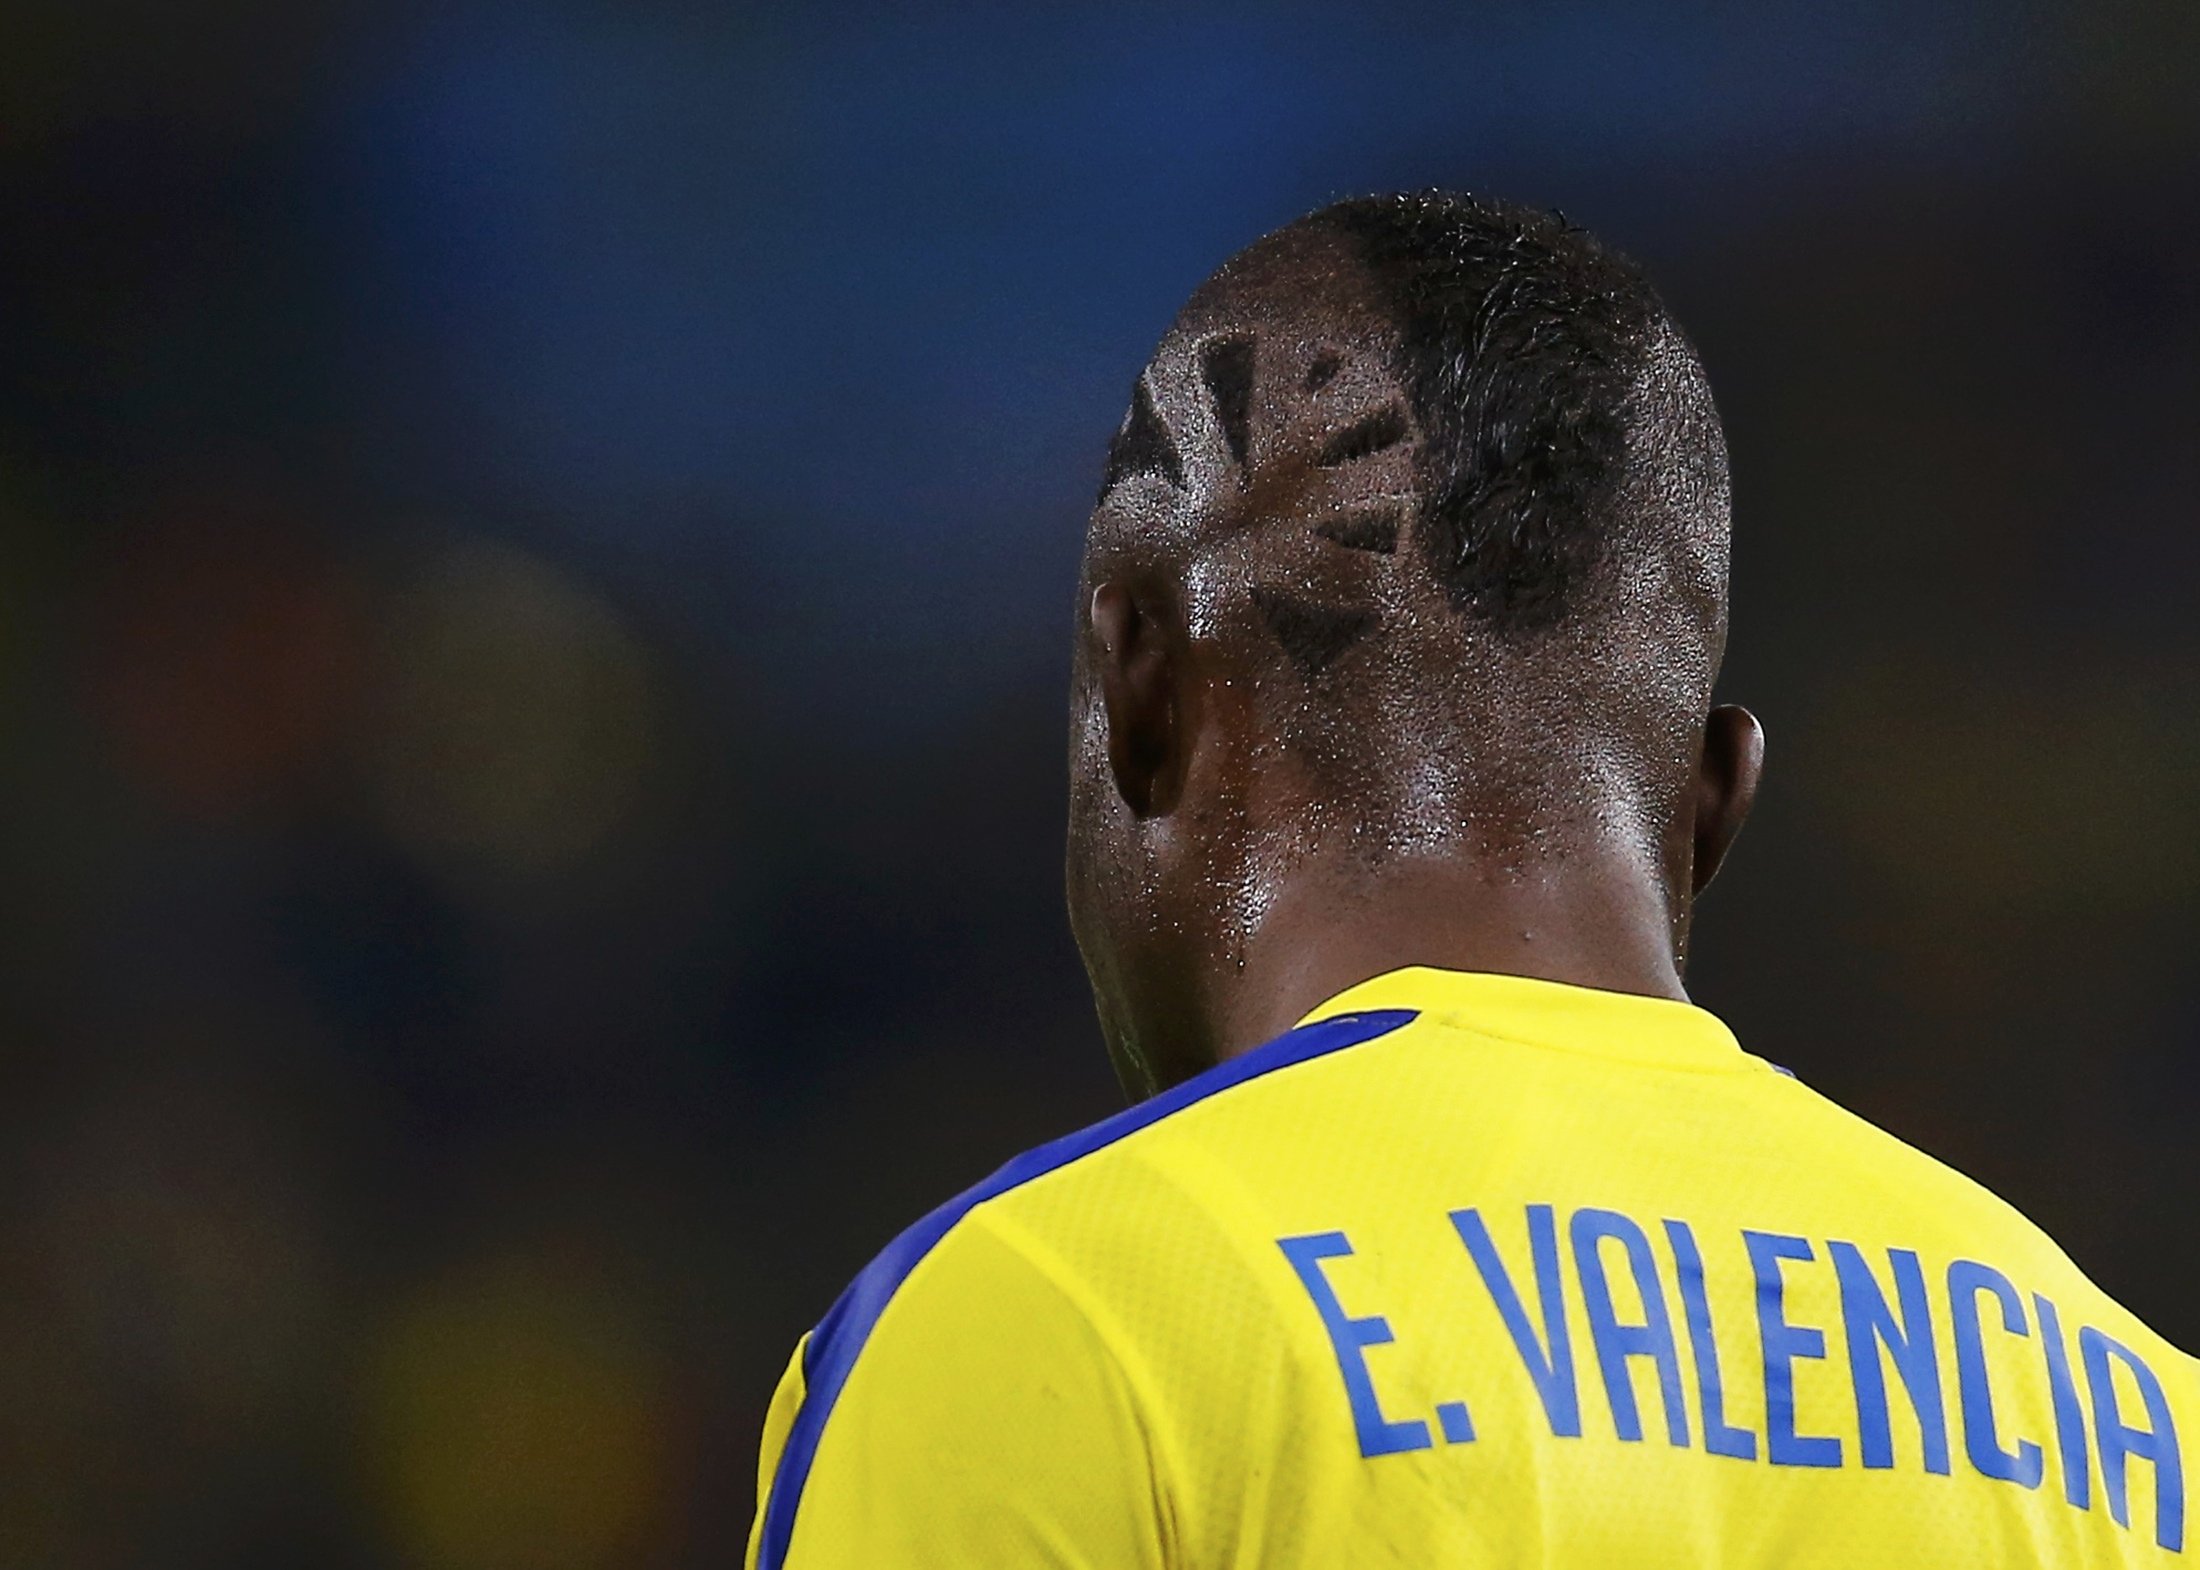 A backview shows the hair style of Ecuador's Enner Valencia during their match against France at the Maracana stadium in Rio de Janeiro on June 25, 2014.